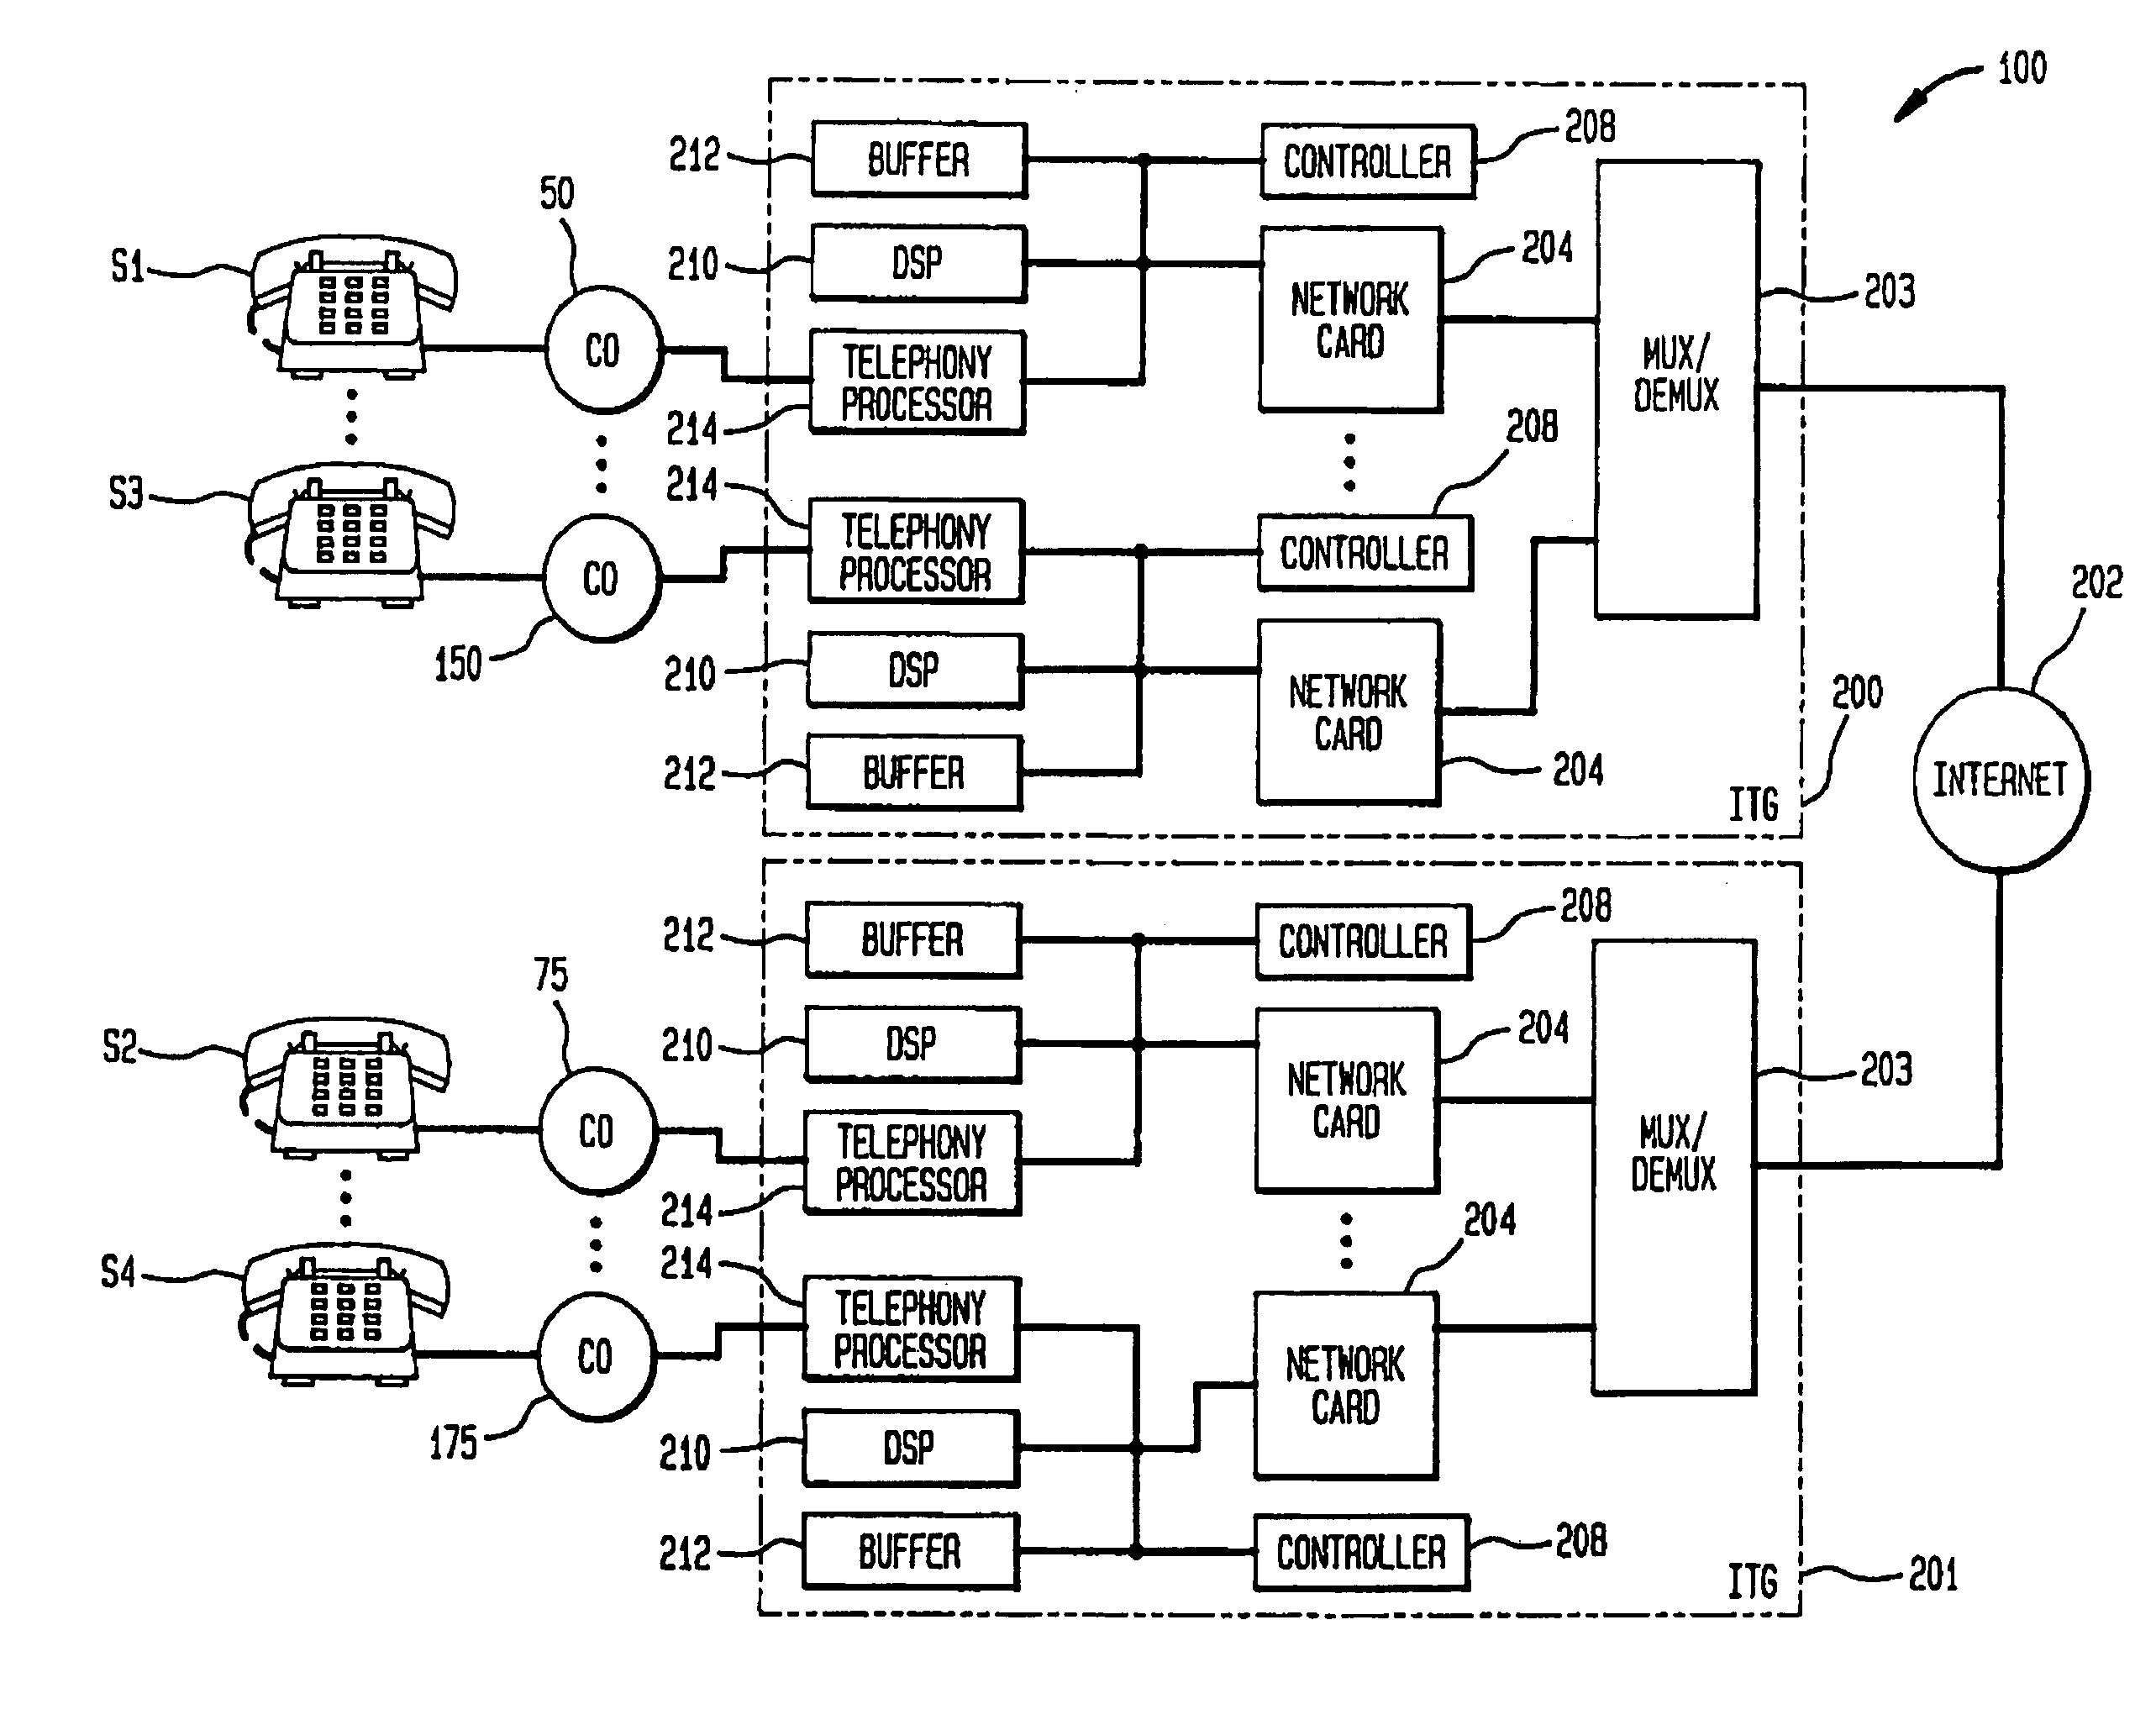 Methods and apparatus for providing voice communications through a packet network